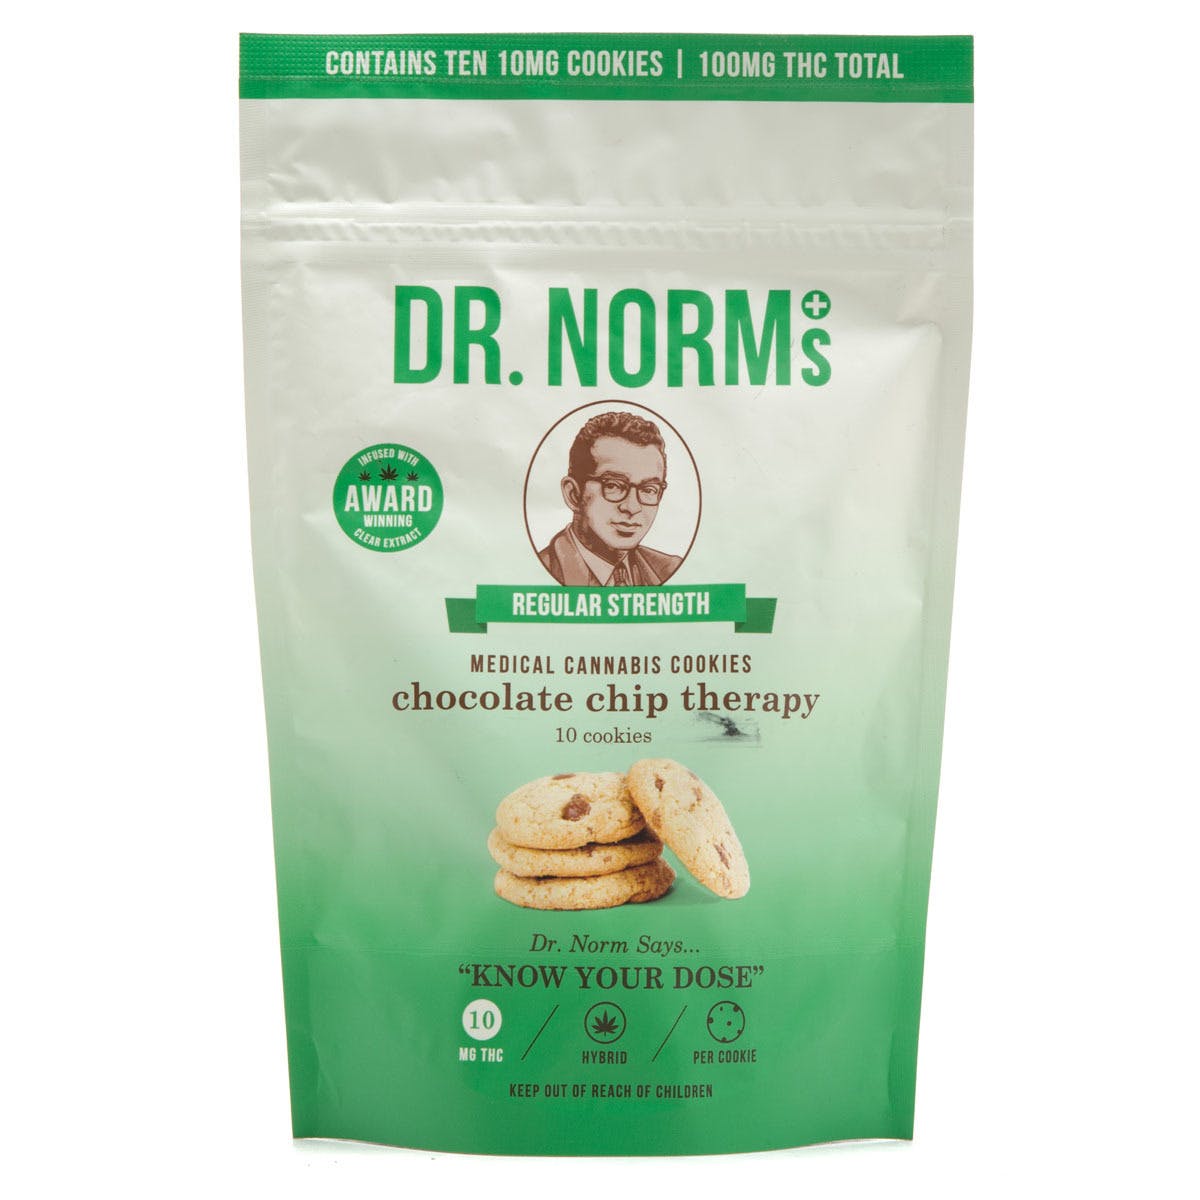 marijuana-dispensaries-new-age-care-center-in-los-angeles-10mg-choco-chip-therapy-bag-100mg-total